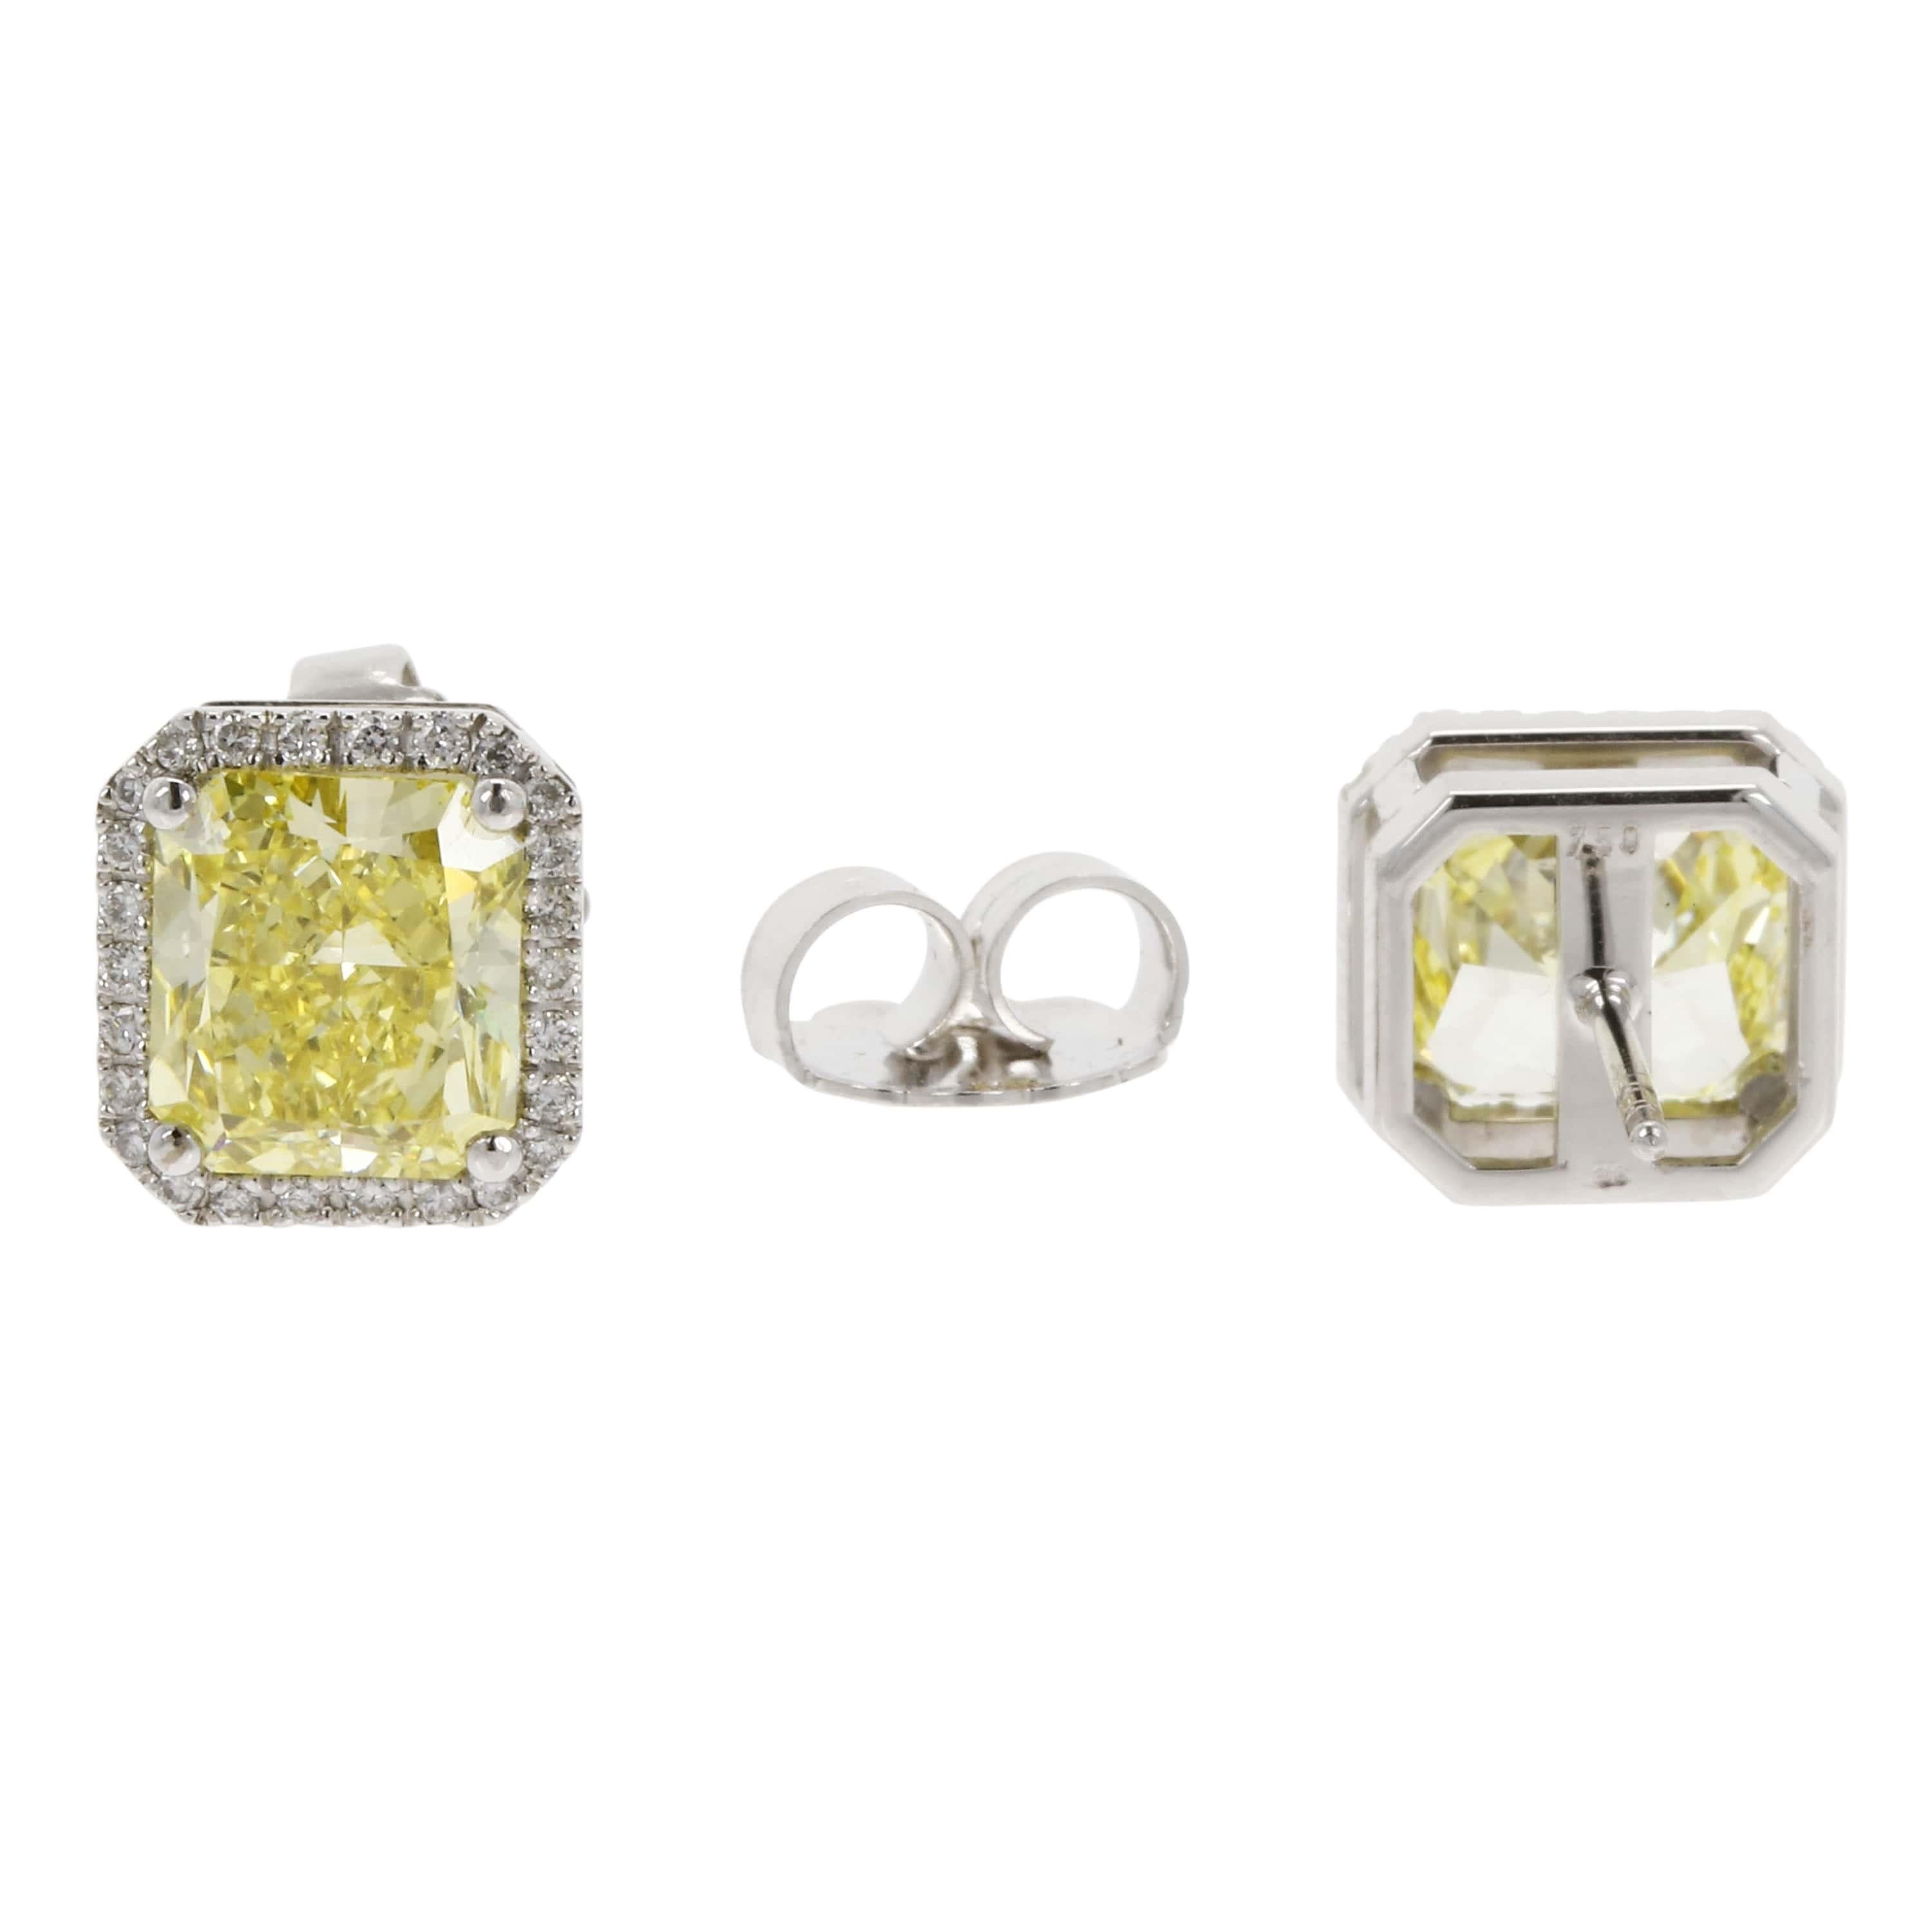 Matching pair of radiant-cut yellow diamonds, weighing 3.52 carats and 3.41 carats, set within a frame of round brilliant diamonds weighing approximately 0.70 carats in total. Accompanied by GIA diamond reports stating that the diamonds are natural